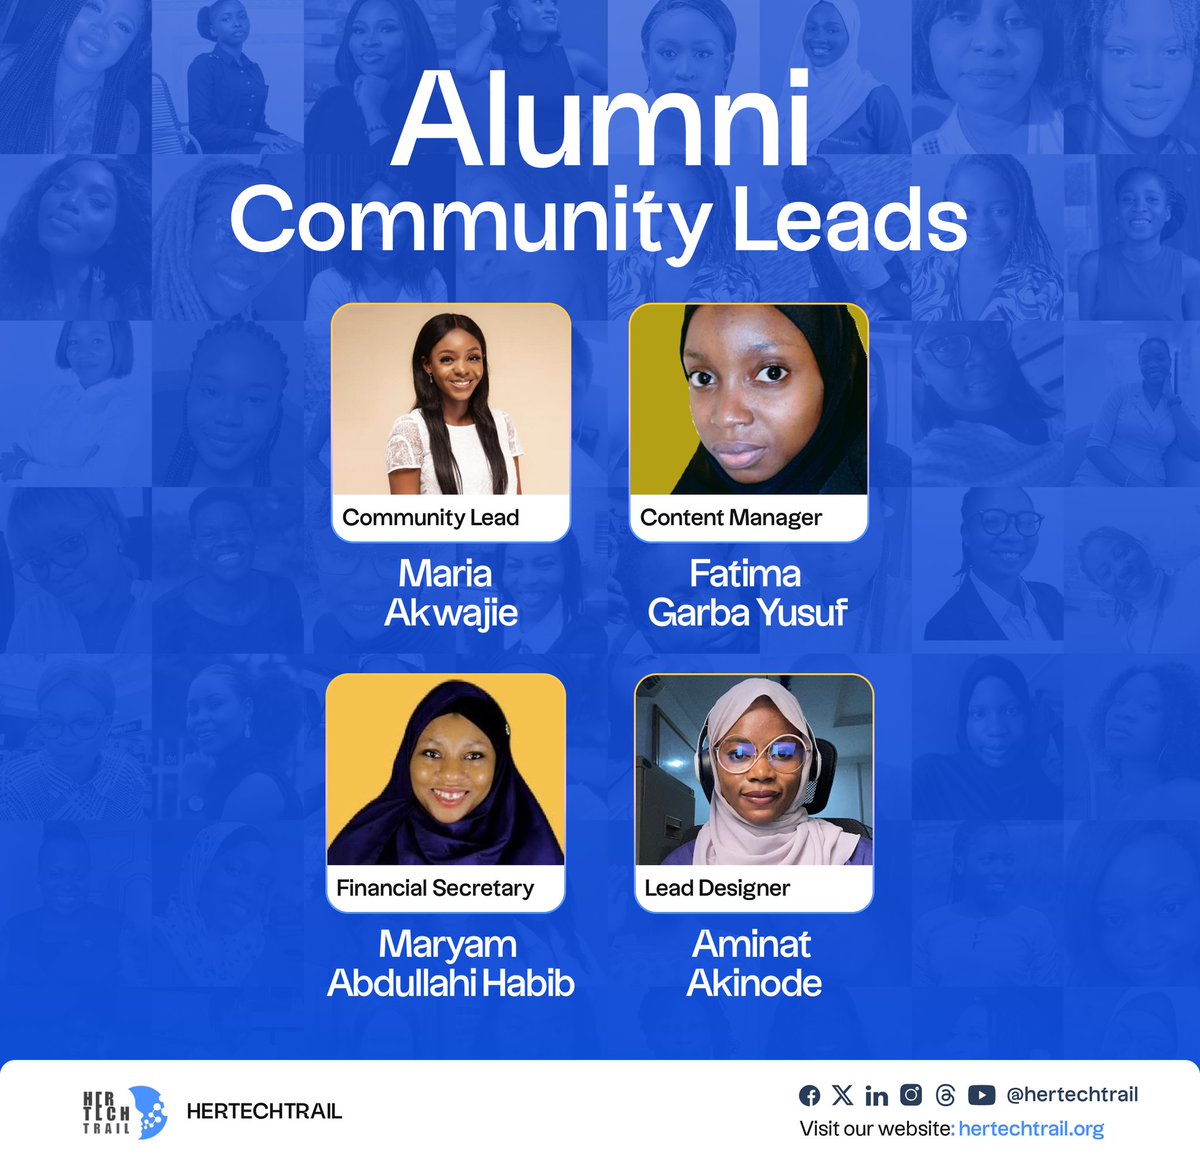 For more than 4 years, we have graduated 👩‍🎓👩‍🎓thousands of black women in tech globally, and up to 75% of them now have tech jobs or run their digital businesses. Today, we’re excited to announce the executive team, overseeing the community, and we’re pumped for the exciting